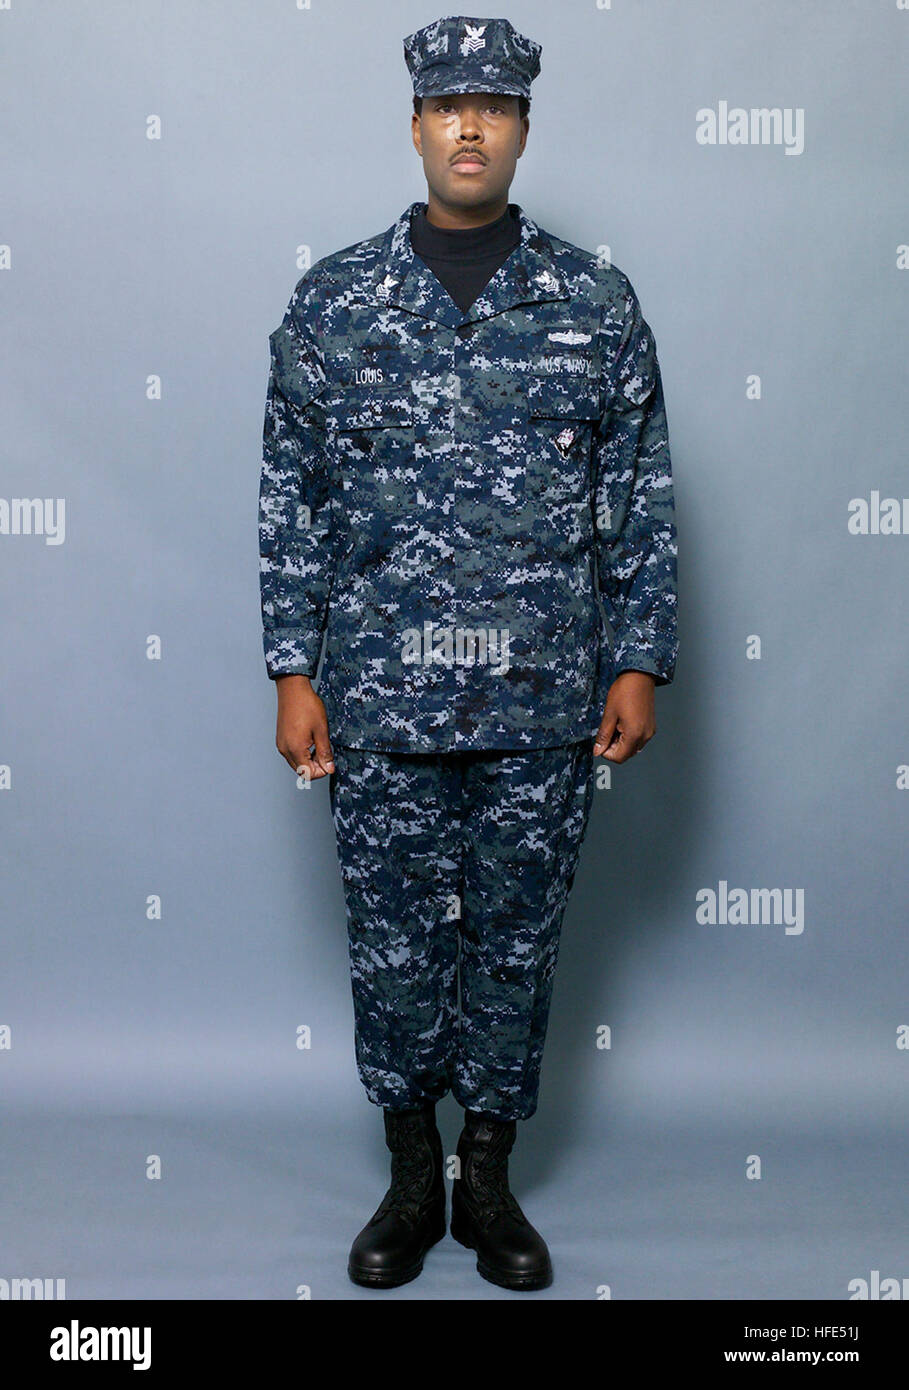 041018-N-0000X-006 Norfolk, Va. (Oct. 18, 2004) - The Navy introduced a set  of concept working uniforms for Sailors E-1 through O-10, Oct. 18th, in  response to the fleet's feedback on current uniforms.